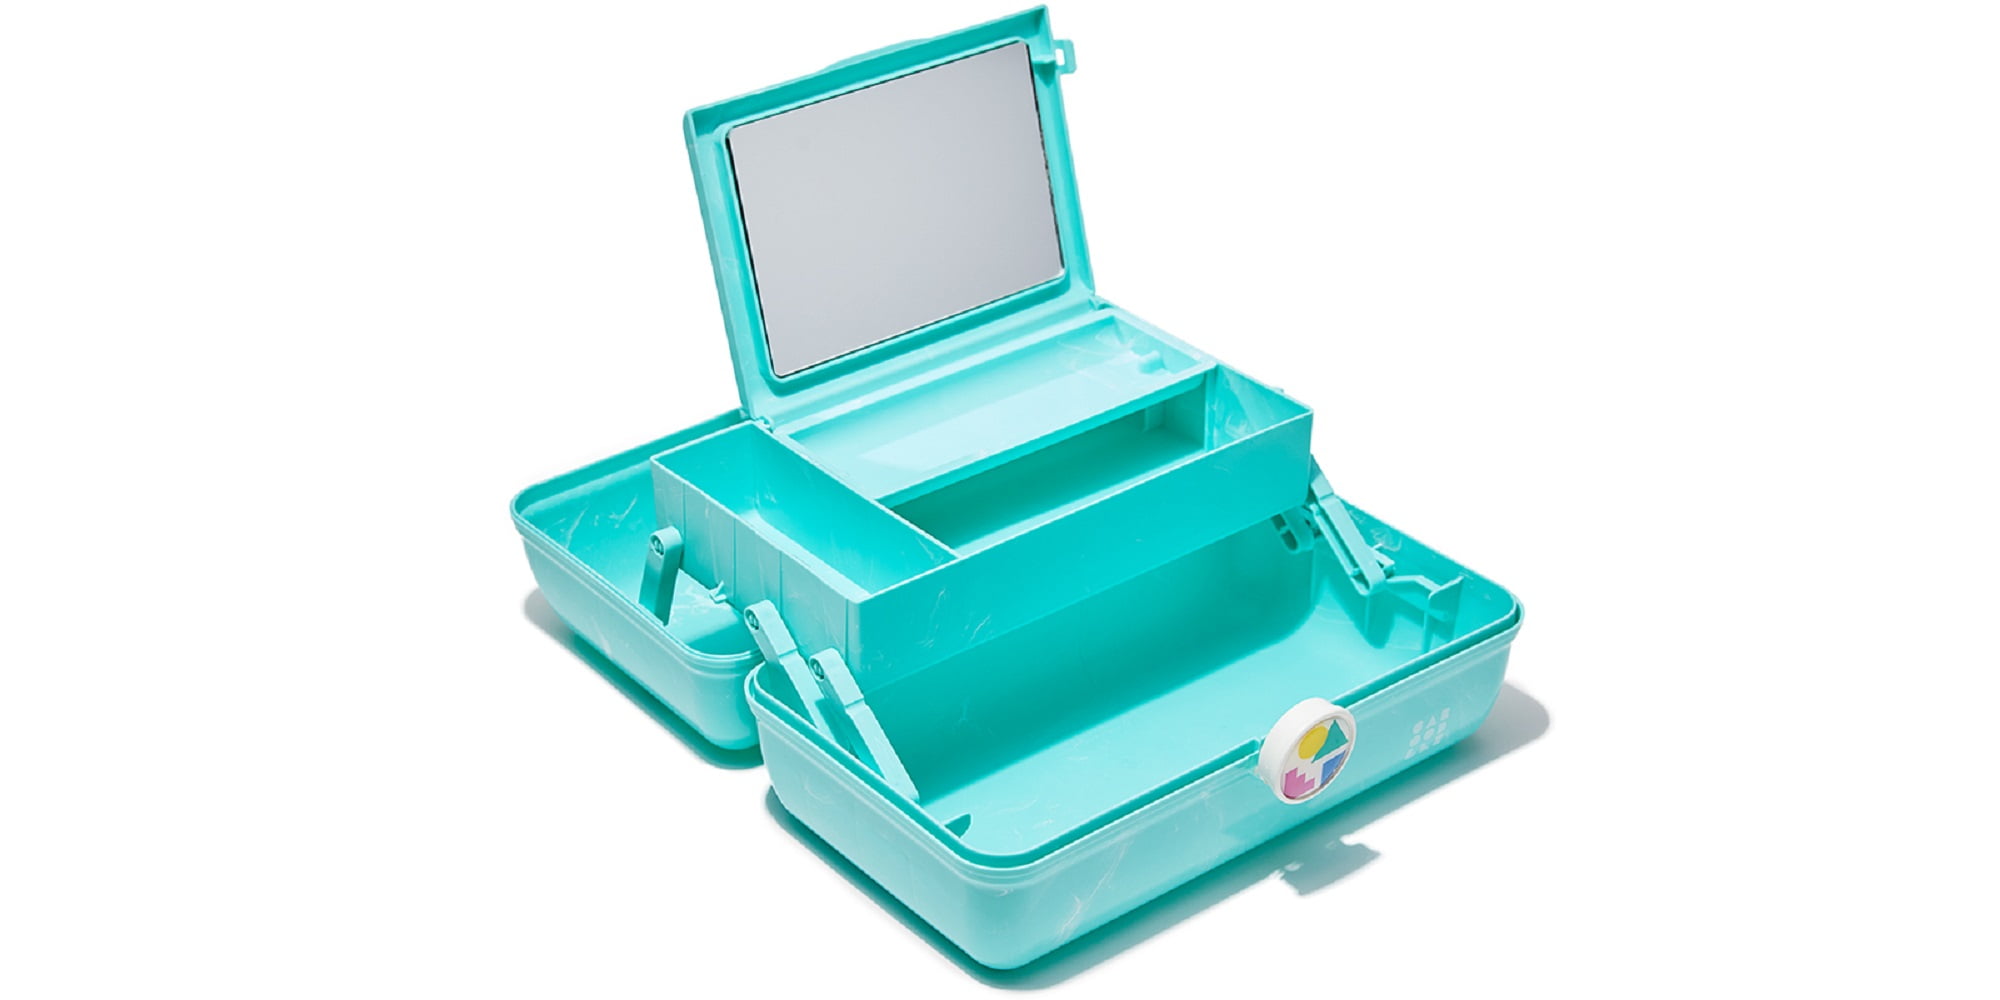 Caboodles® On The Go Girl™ Set - White & Pink